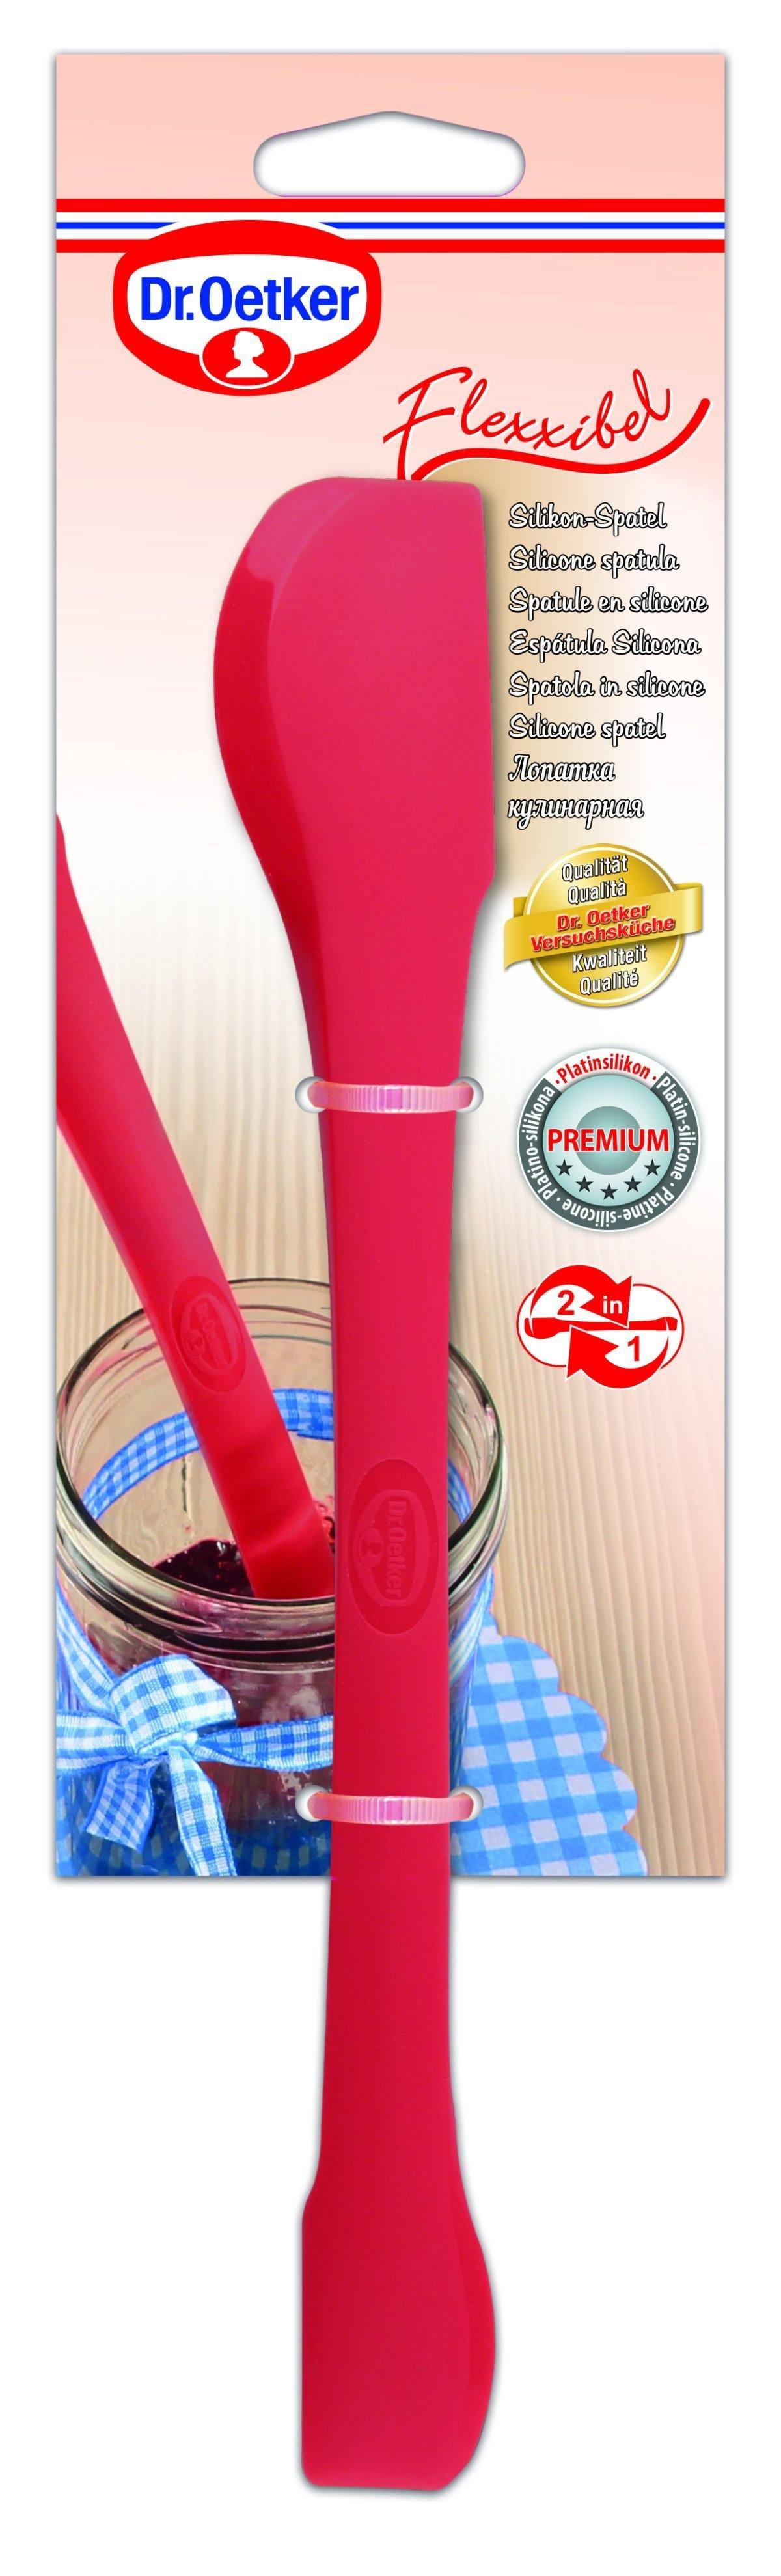 Dr. Oetker Spatula Flexxibel Of Silicone, Red, 27X4X2 cm - Whole and All